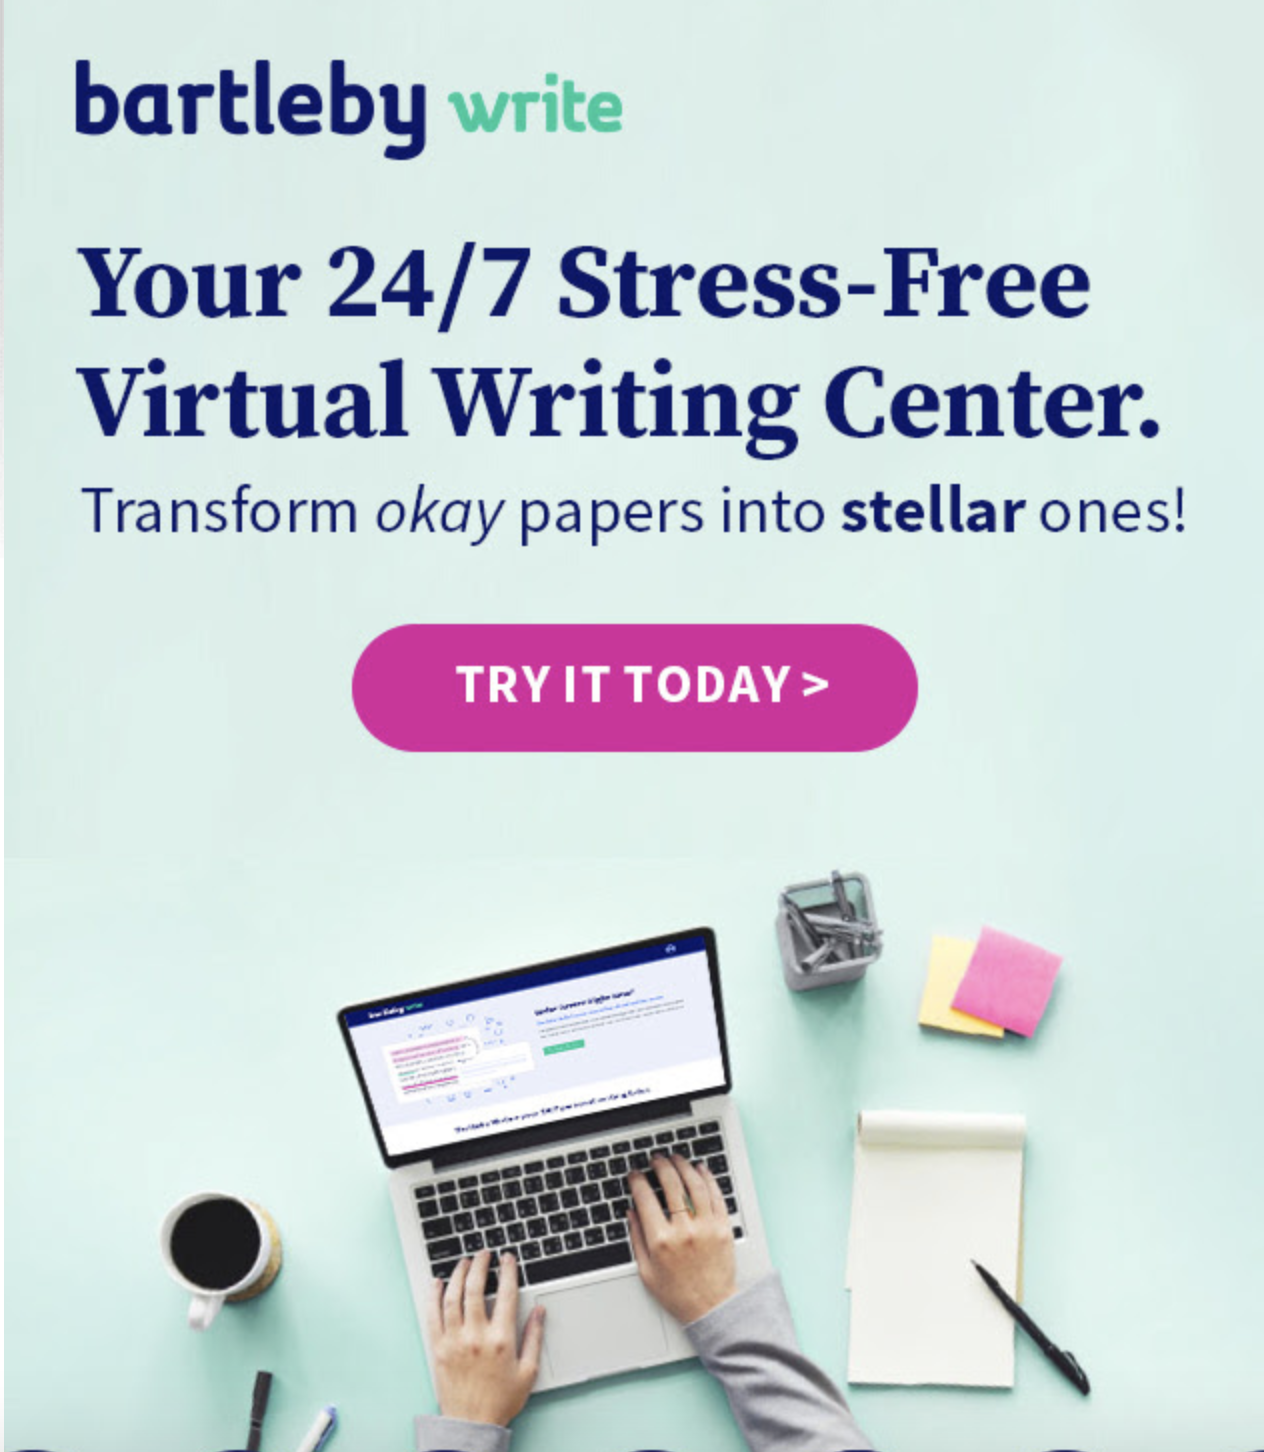 A screenshot of the promotional material sent to the whole campus advertising the Bartleby Virtual Writing Center.